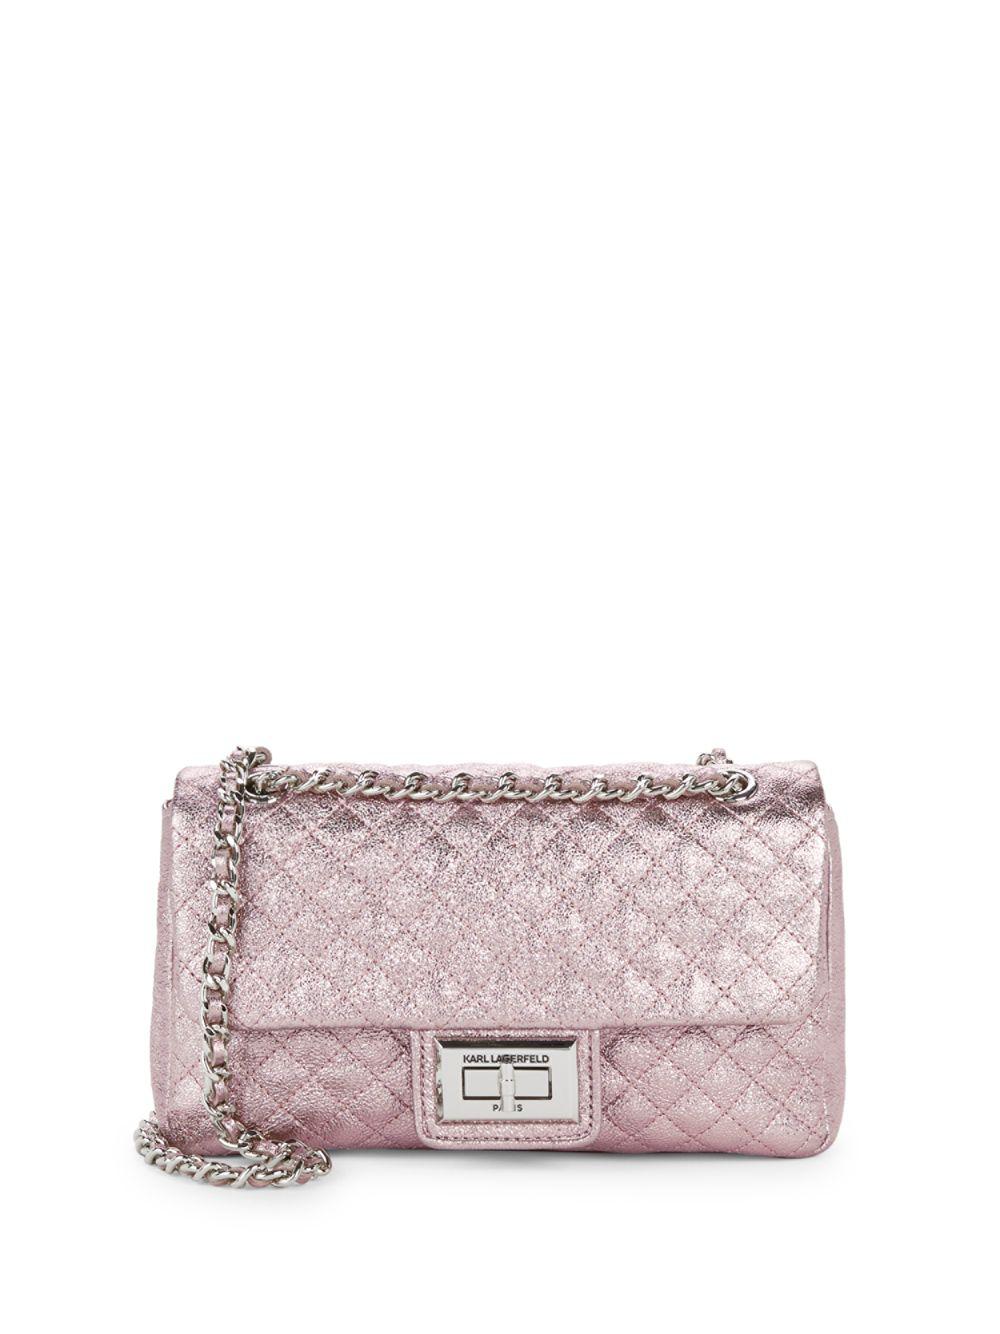 Karl Lagerfeld Leather Quilted Metallic Crossbody Bag - Lyst